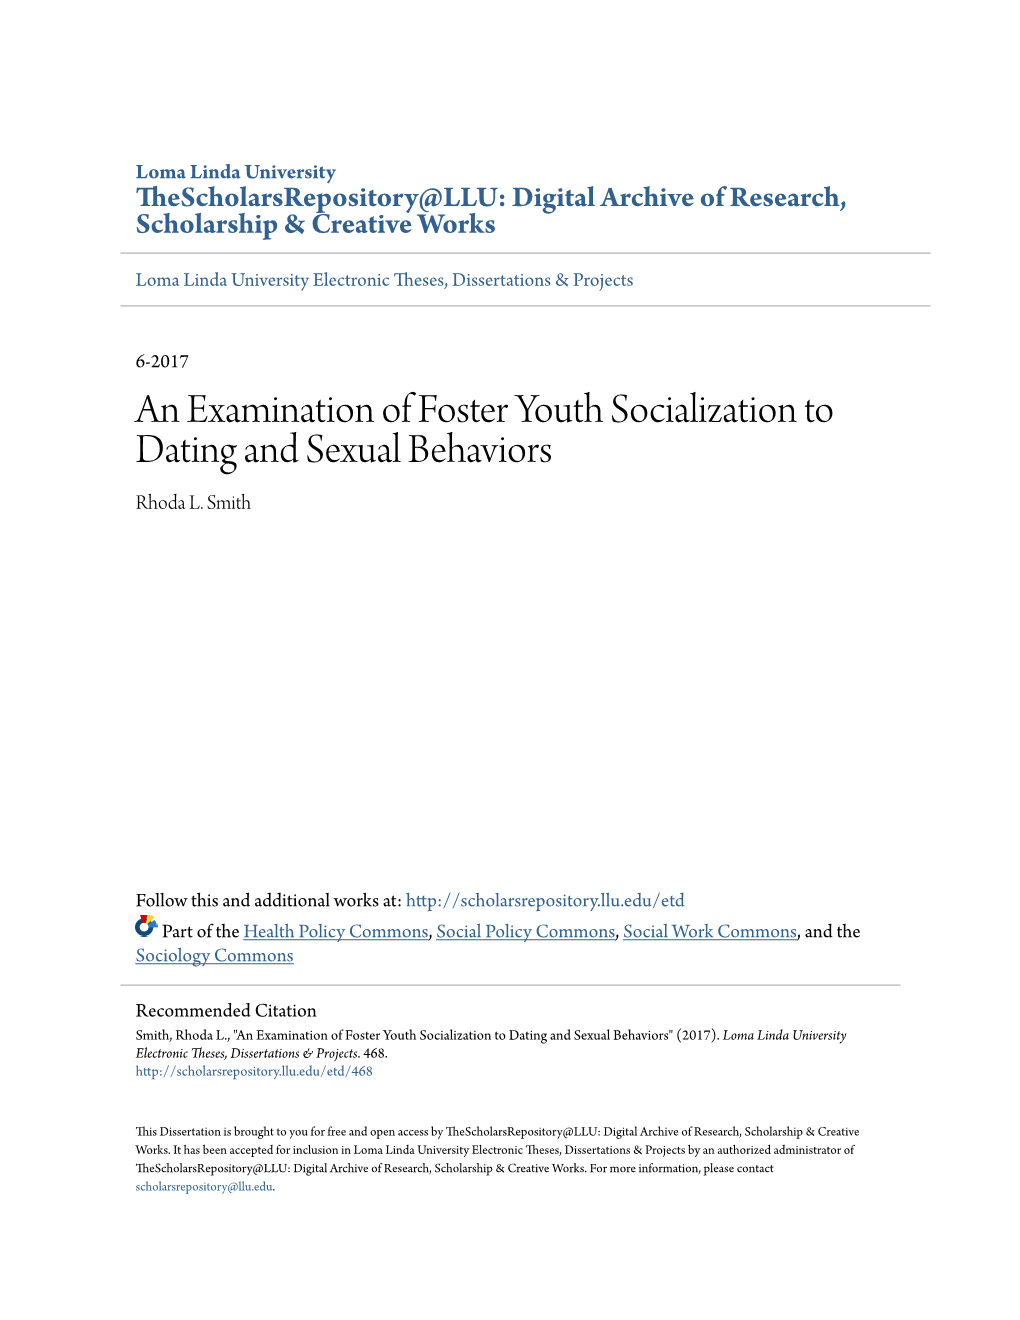 An Examination of Foster Youth Socialization to Dating and Sexual Behaviors Rhoda L